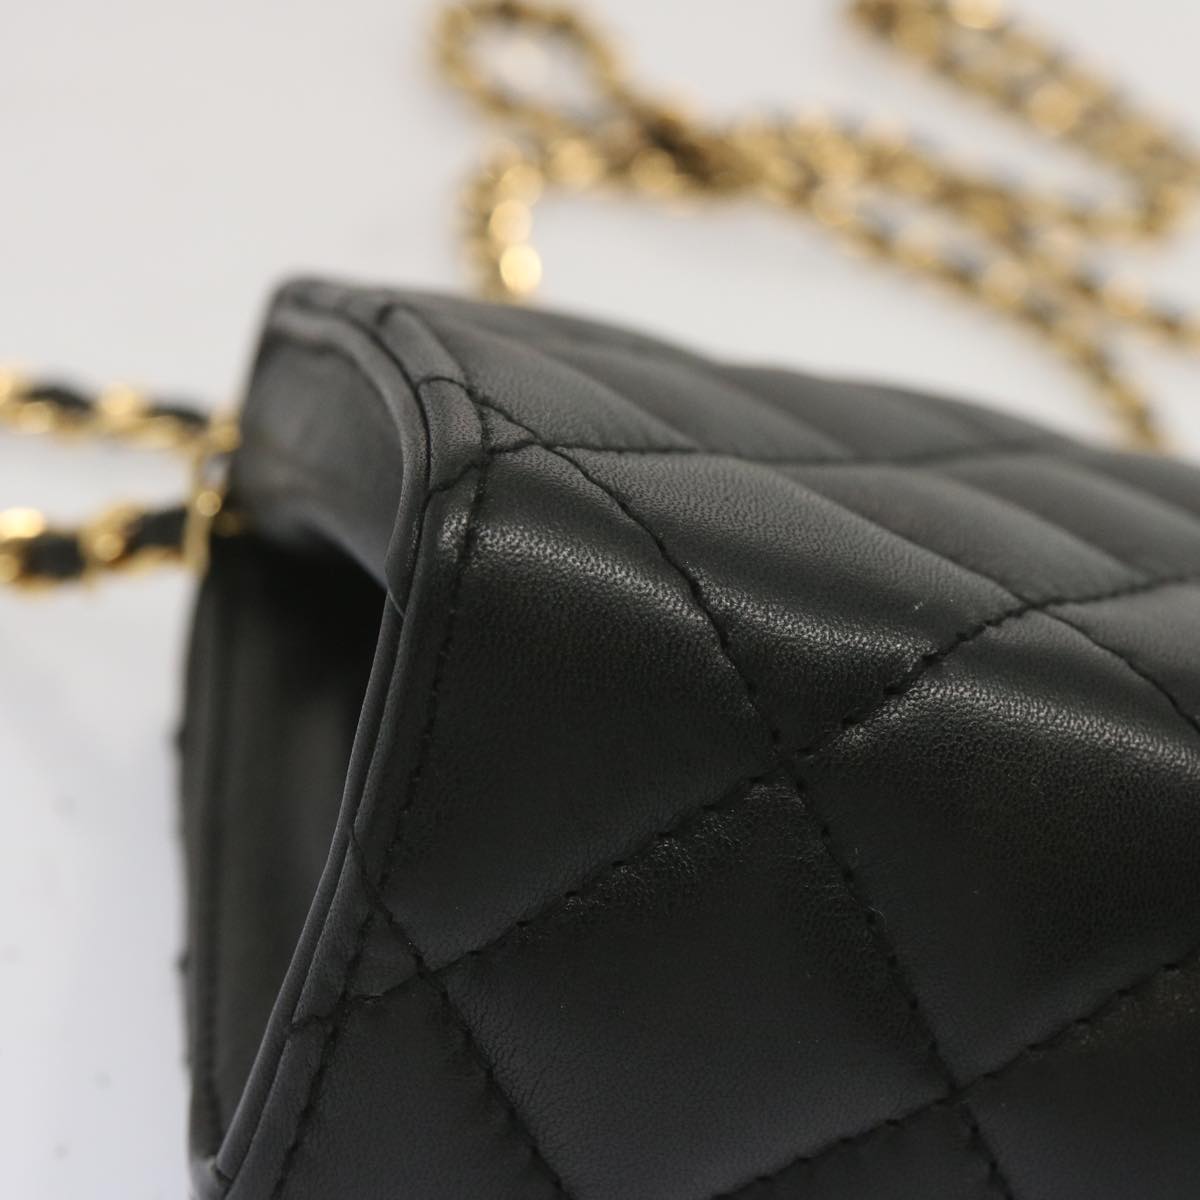 GIVENCHY Quilted Chain Shoulder Bag Leather Black Auth am5981